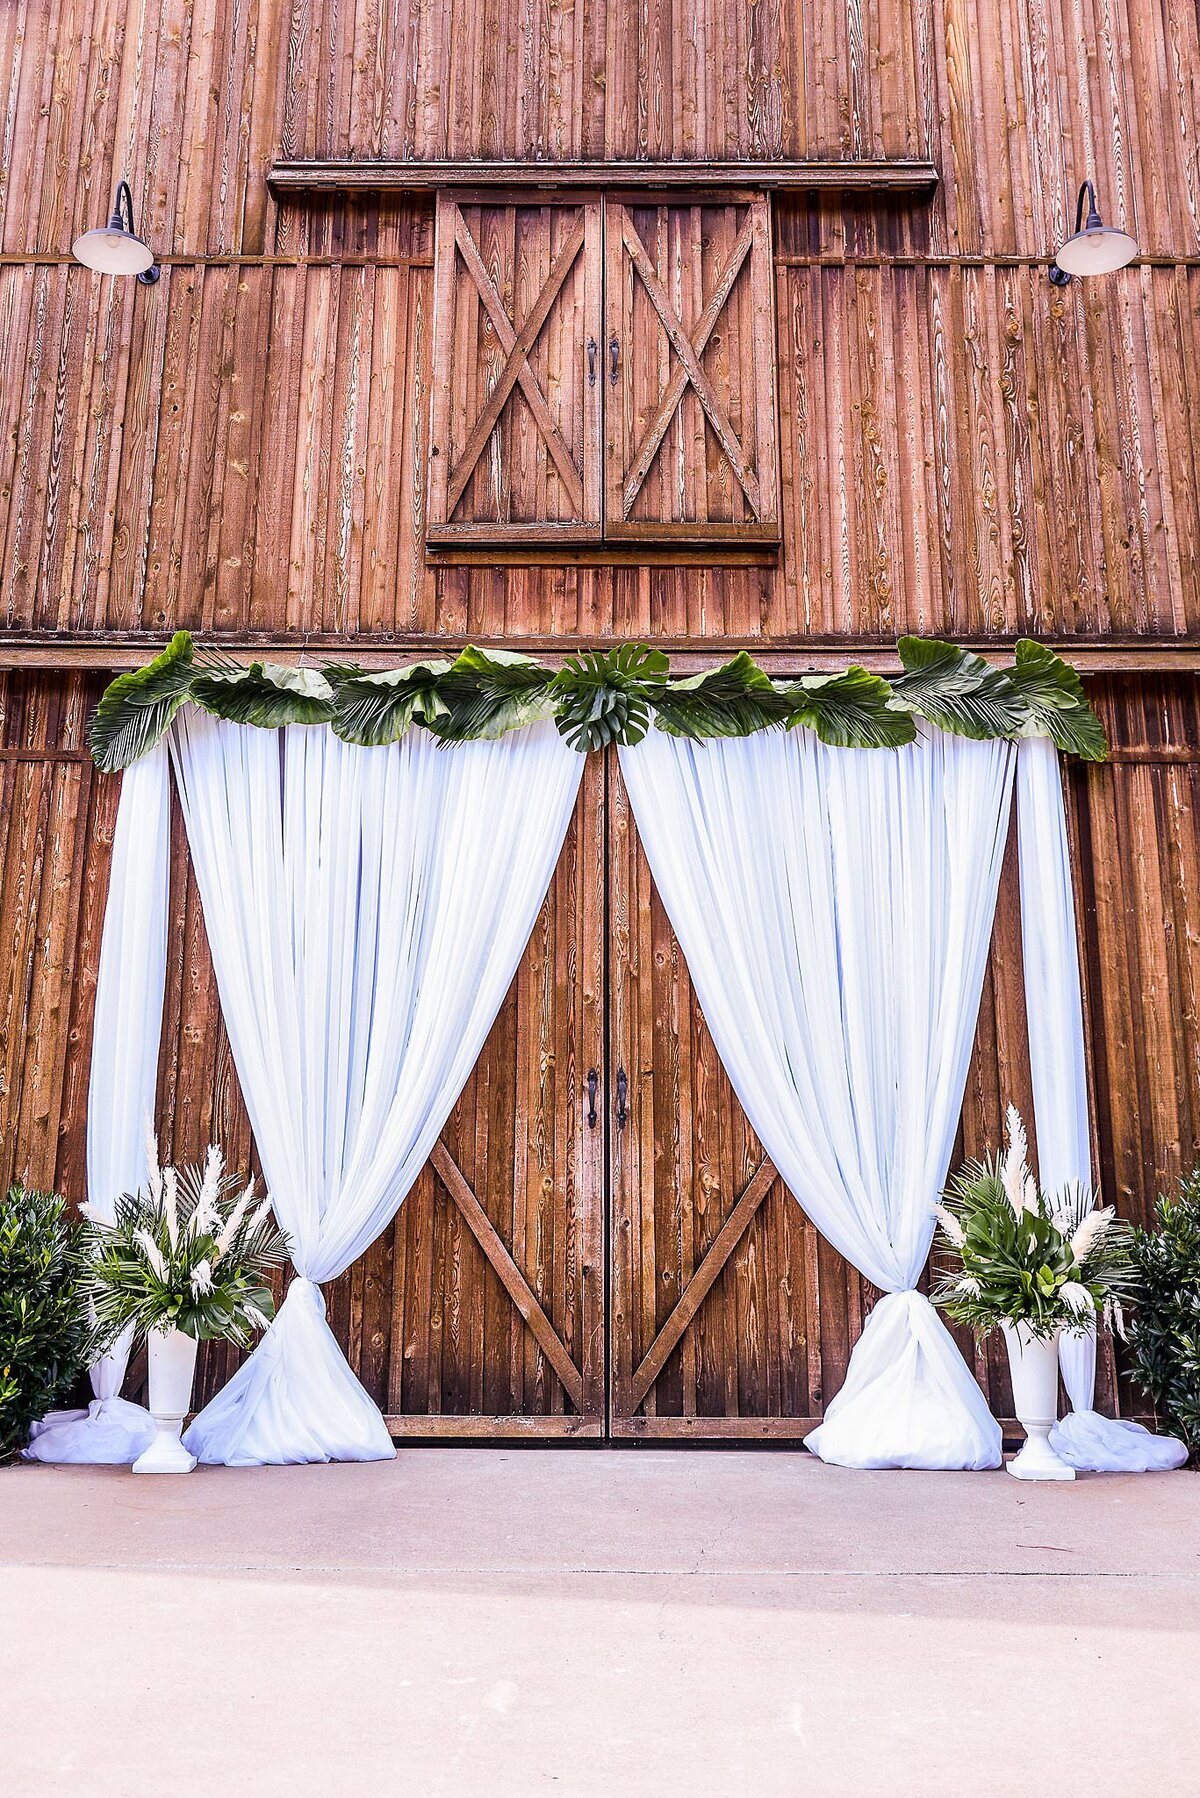 Saddlewood Farms barn doors with draping, greenery top garland, and two entrance arrangements